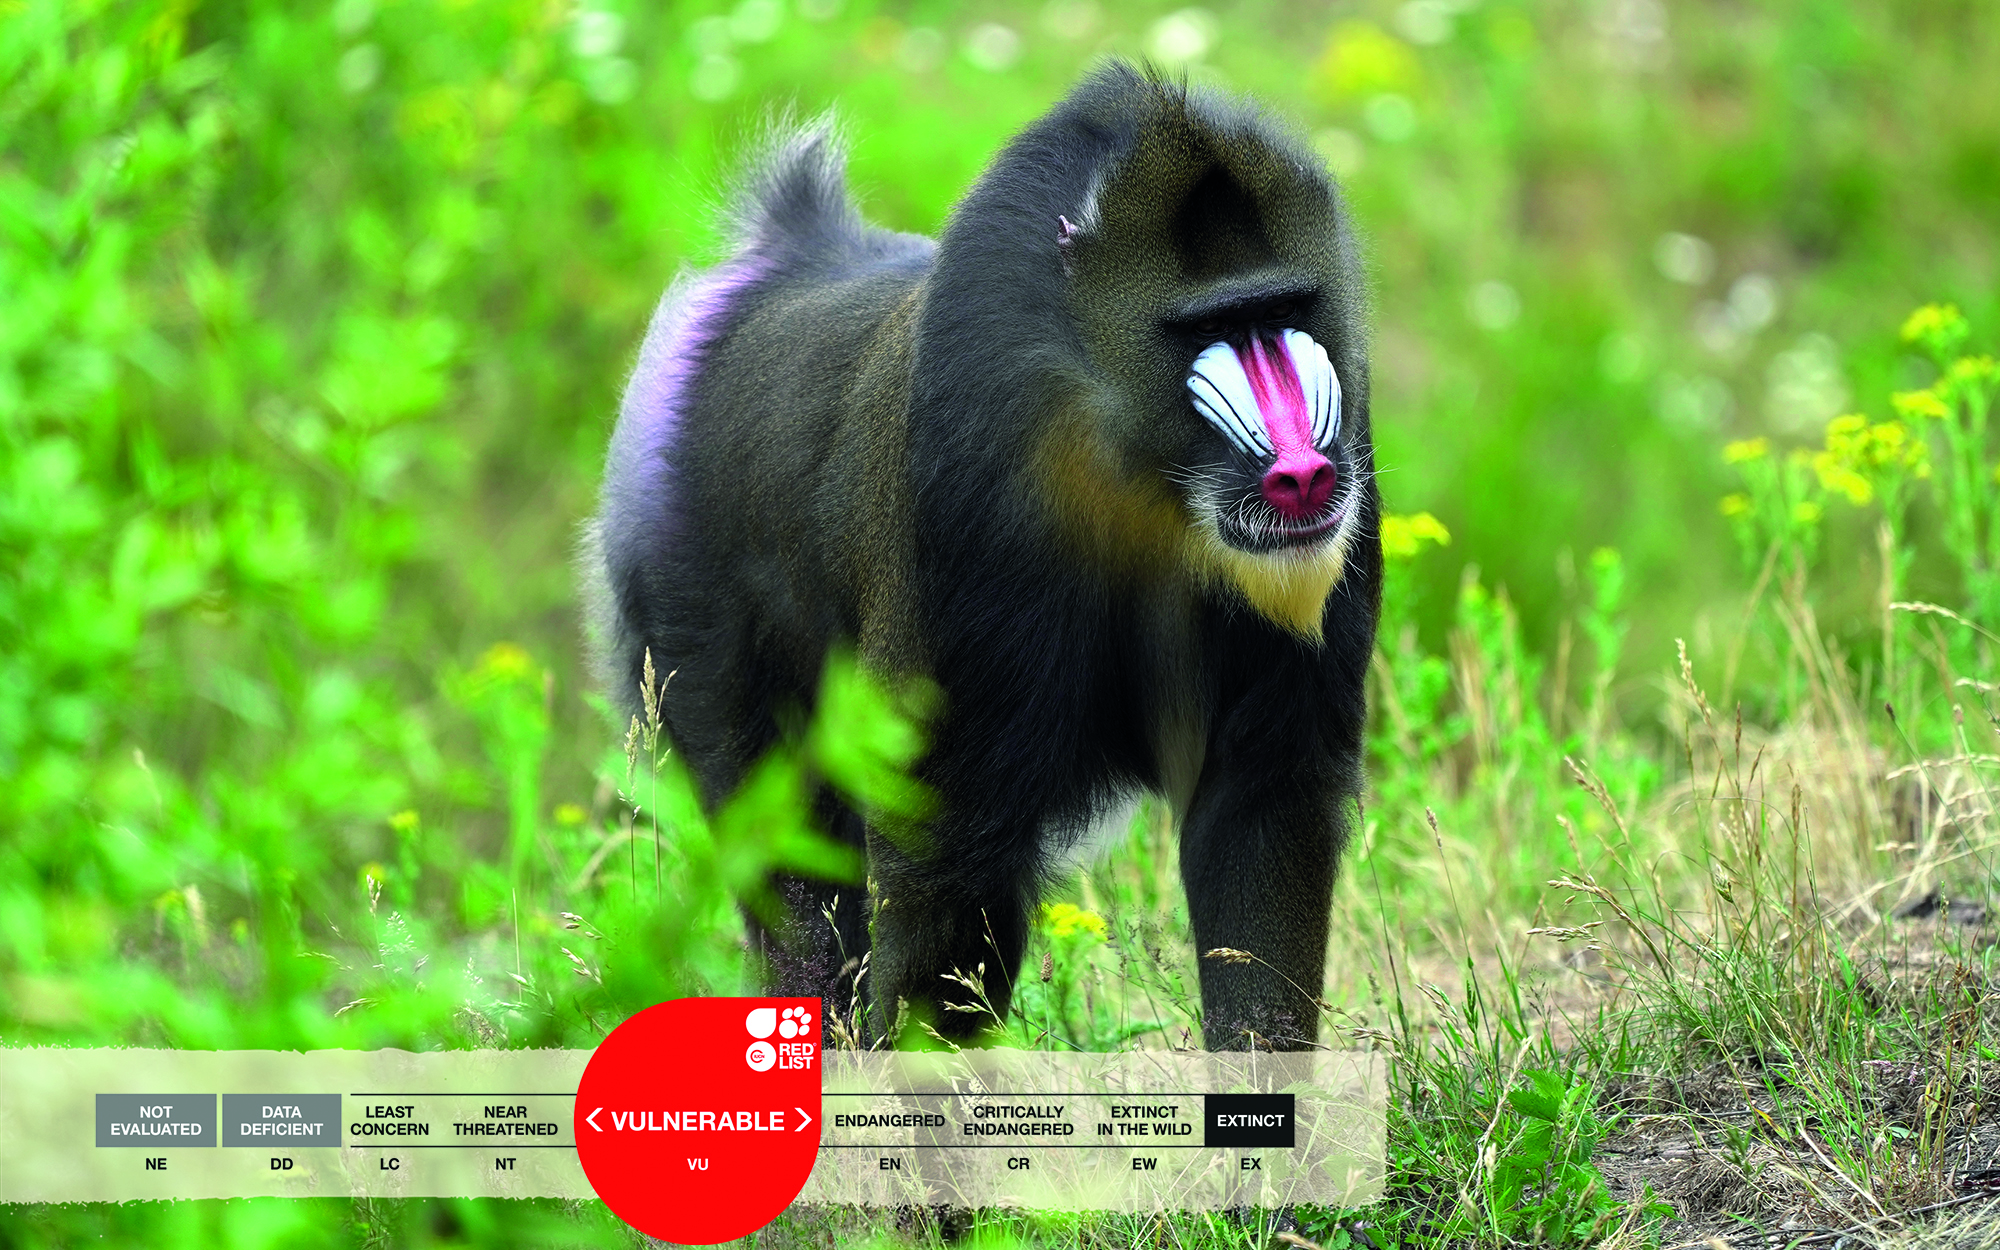 Where can I see mandrills?